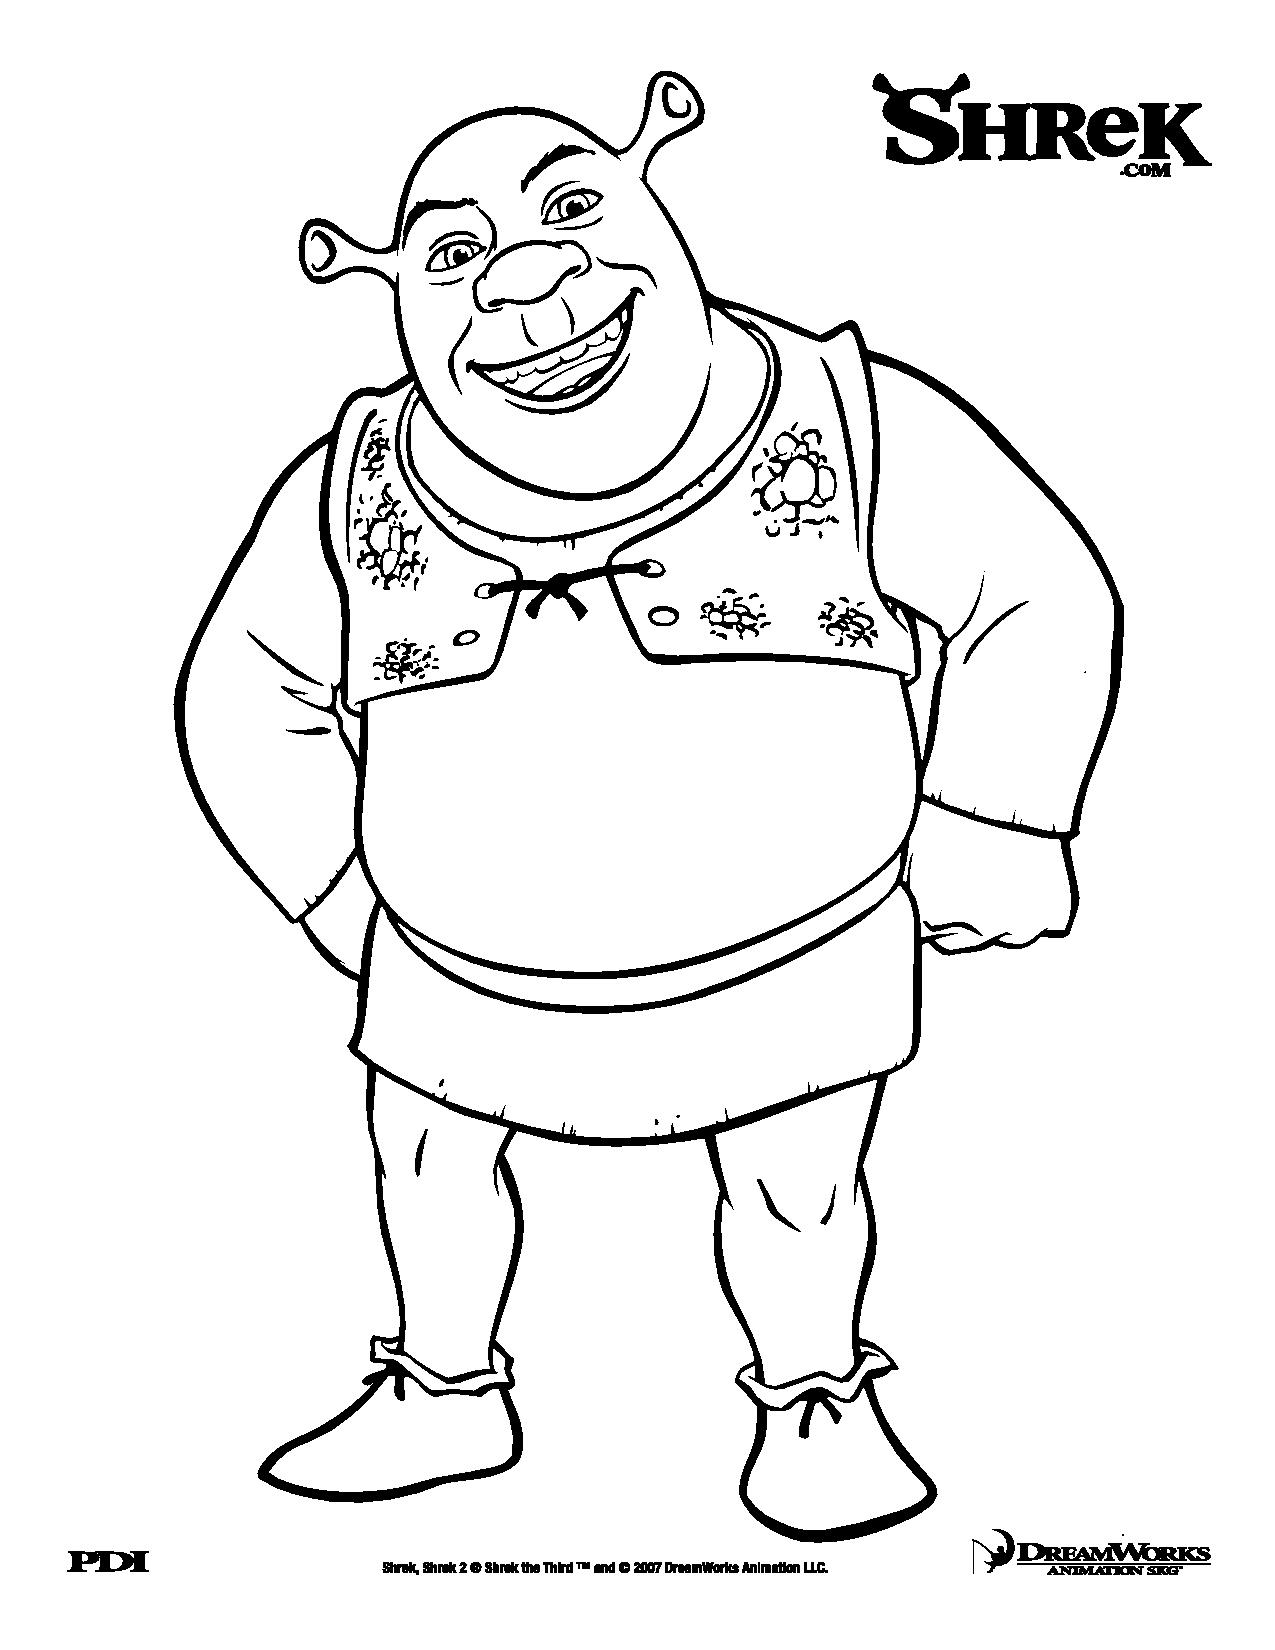 Free Shrek drawing to print and color Shrek Kids Coloring Pages